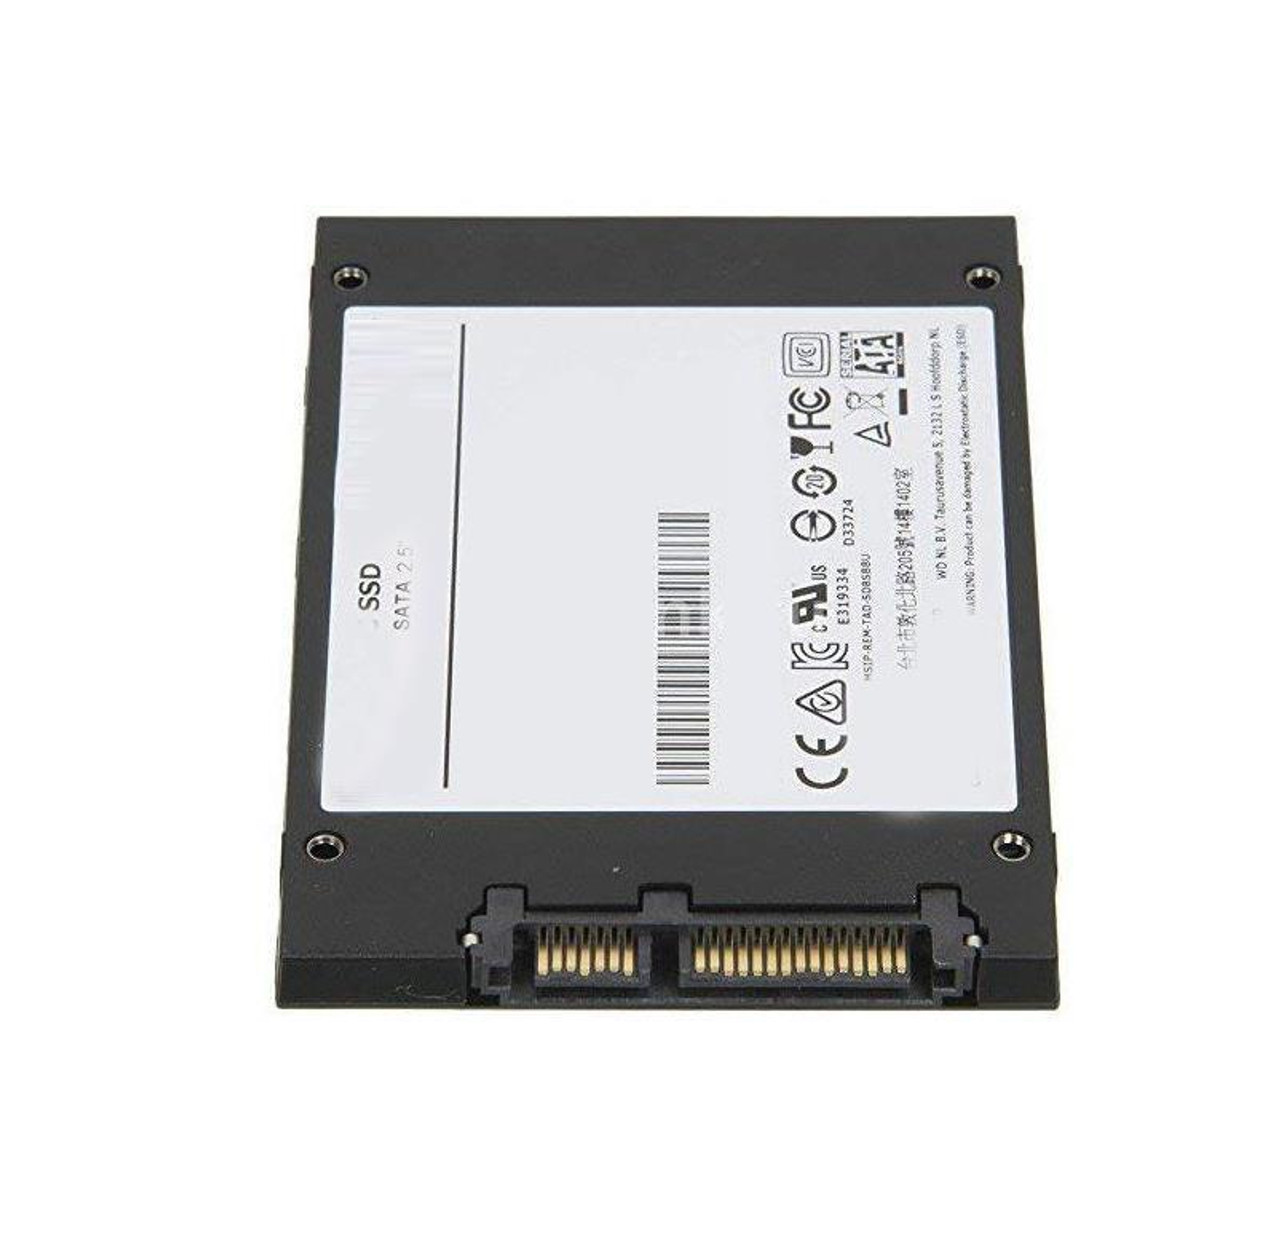 03B0300031600 ASUS 128GB MLC SATA 6Gbps 2.5-inch Internal Solid State Drive (SSD) for UX32A